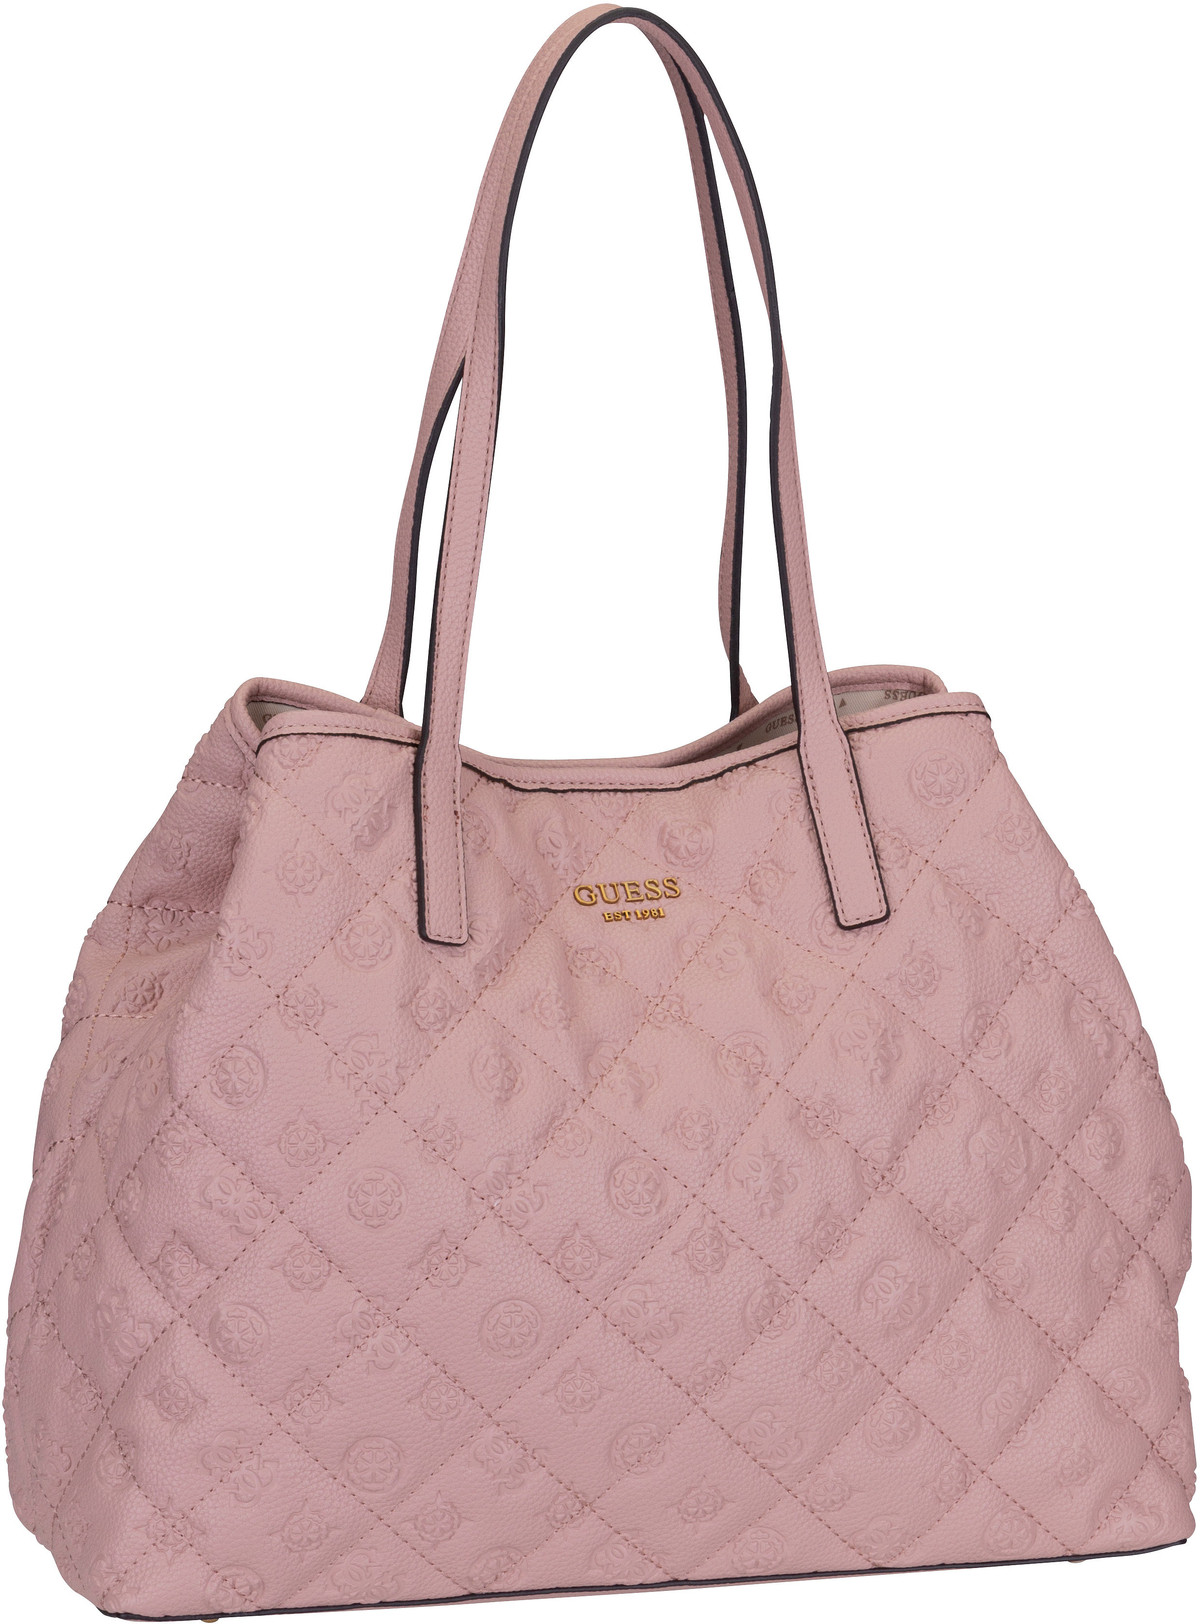 Guess Vikky Large Tote Quilted  in Blush (22.1 Liter), Shopper